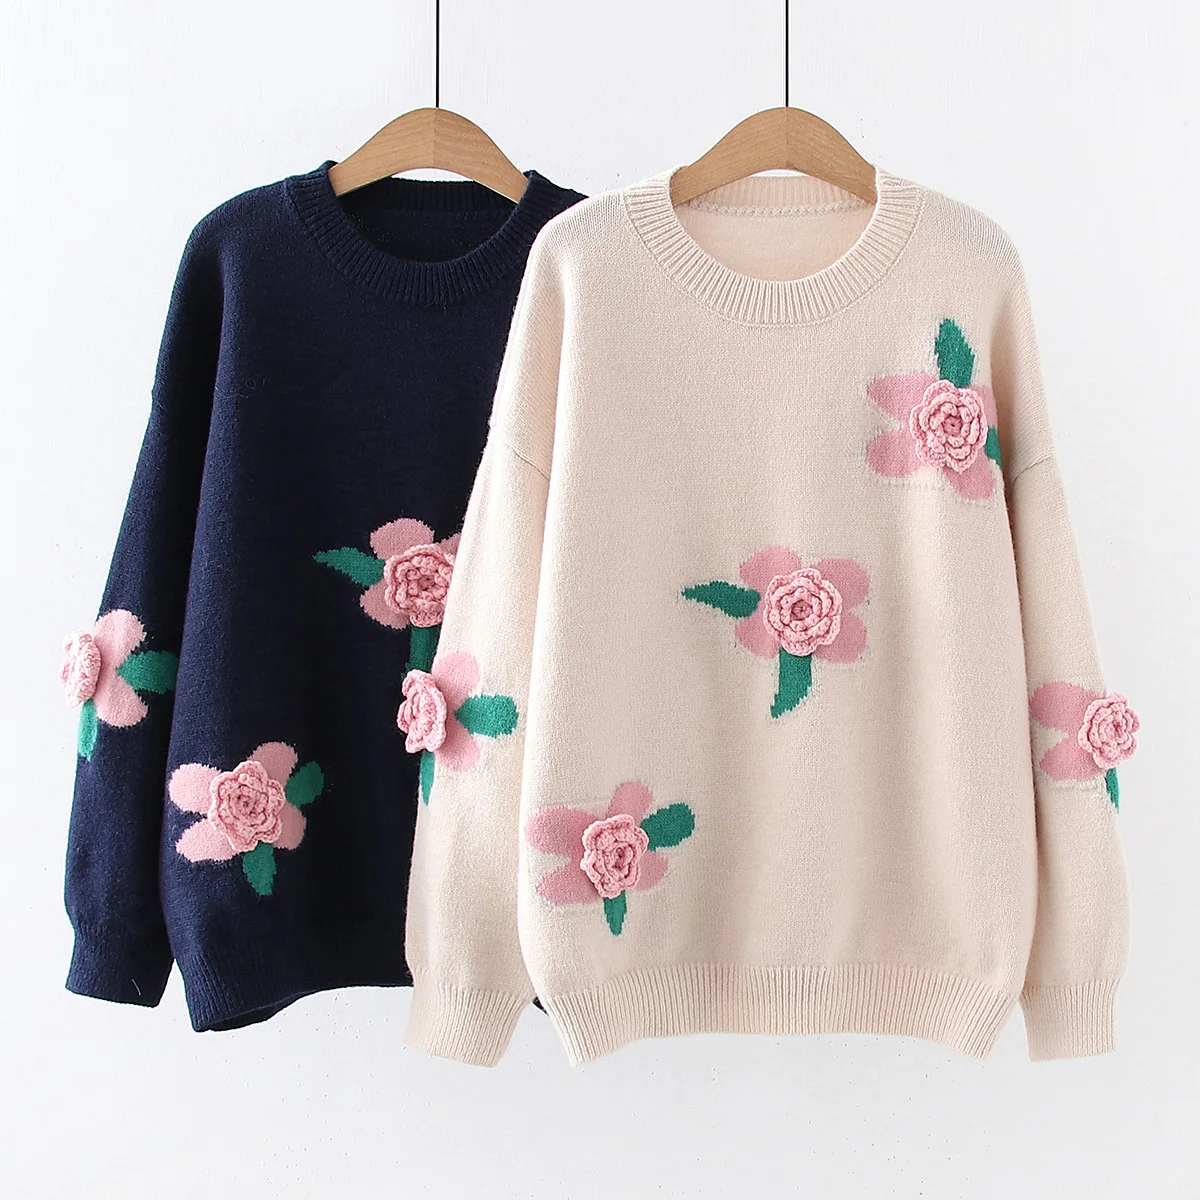 Fashion Sweet Floral Decorate Loose Pullover Sweater Women Autumn Witner Casual O Neck Long Sleeve Cotton Jumpers Female Outwear